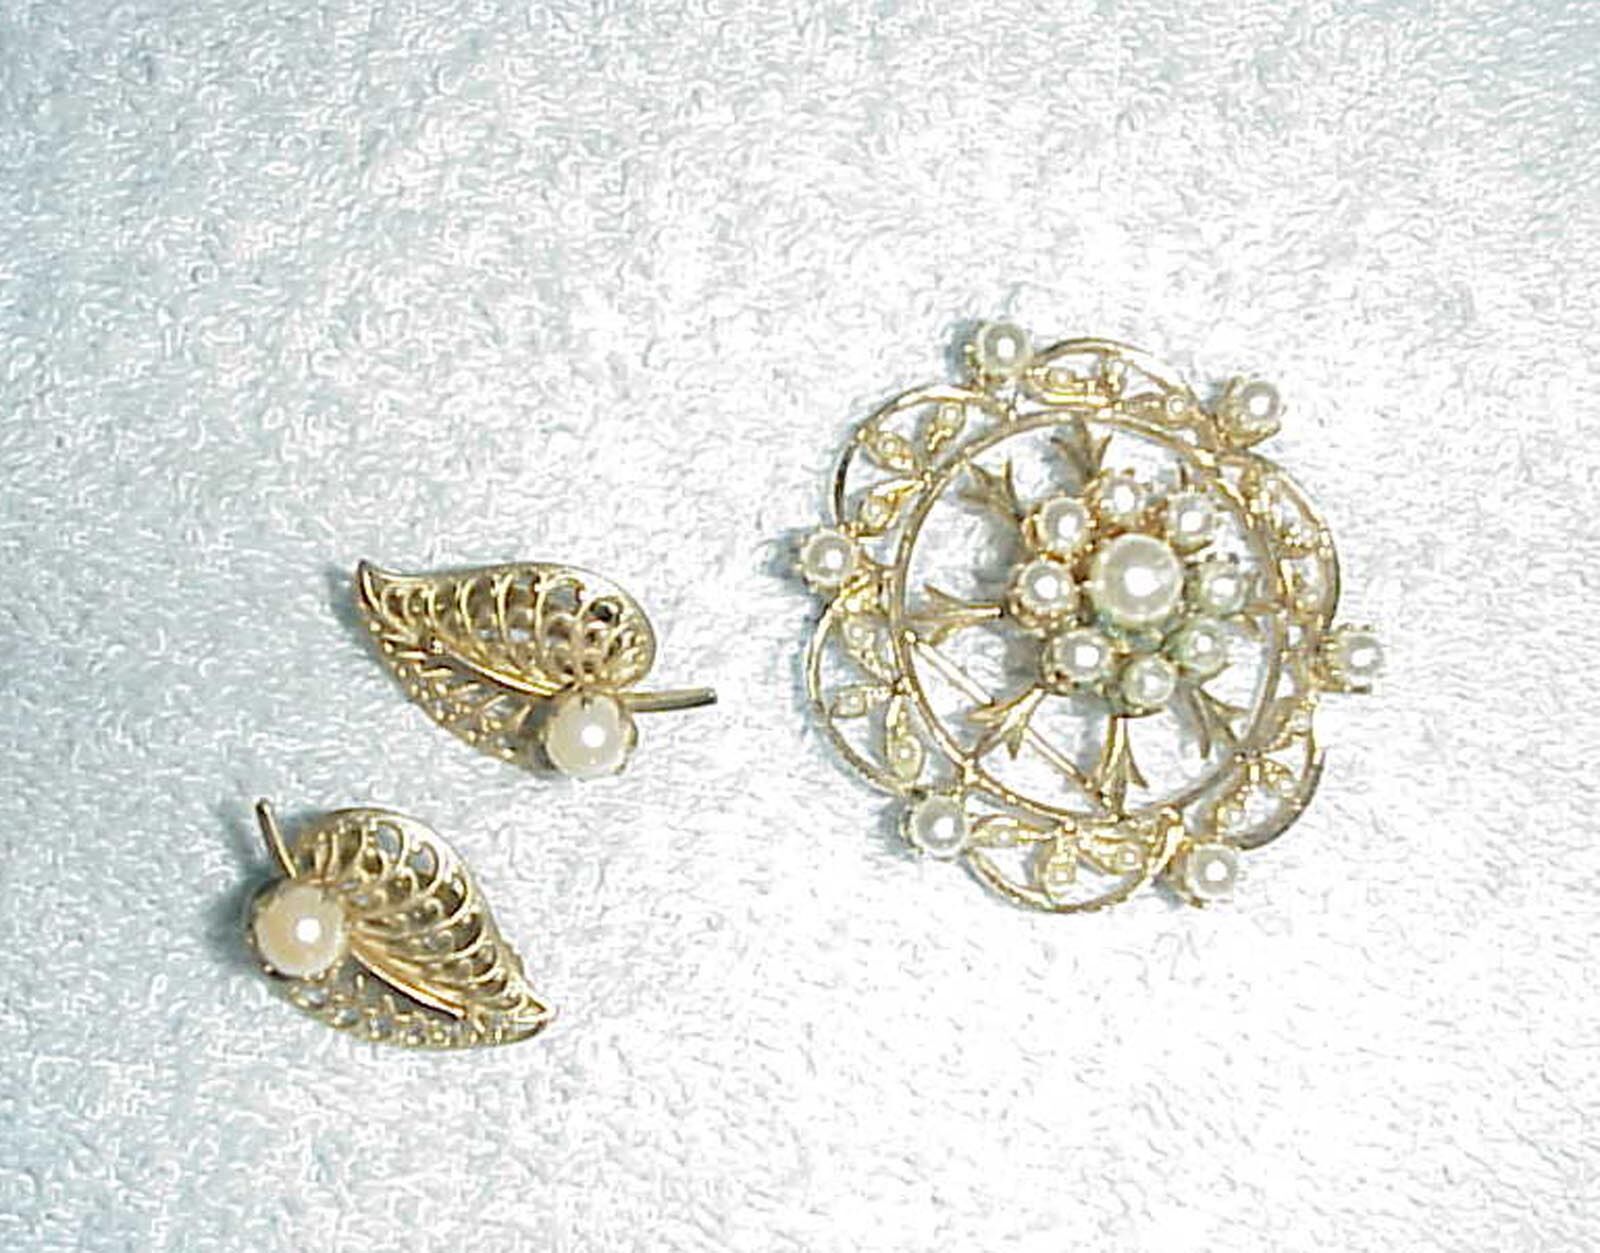 120/12kgf Earrings With Gorgeous Pearl Pin, Gold Tone, Quite Old& Delicate